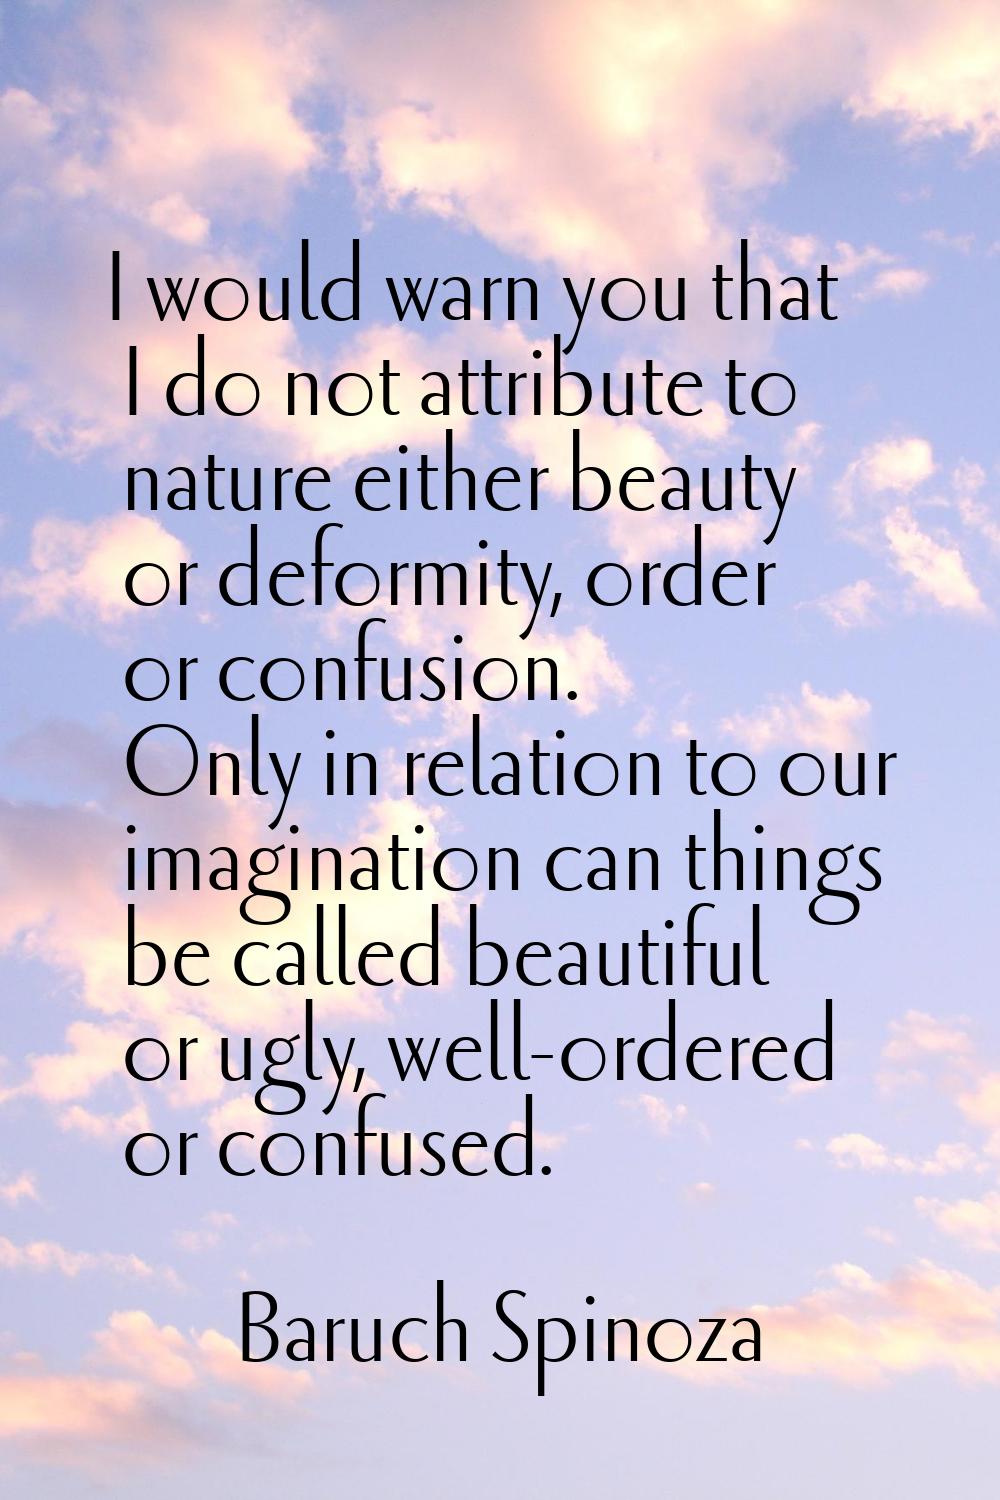 I would warn you that I do not attribute to nature either beauty or deformity, order or confusion. 